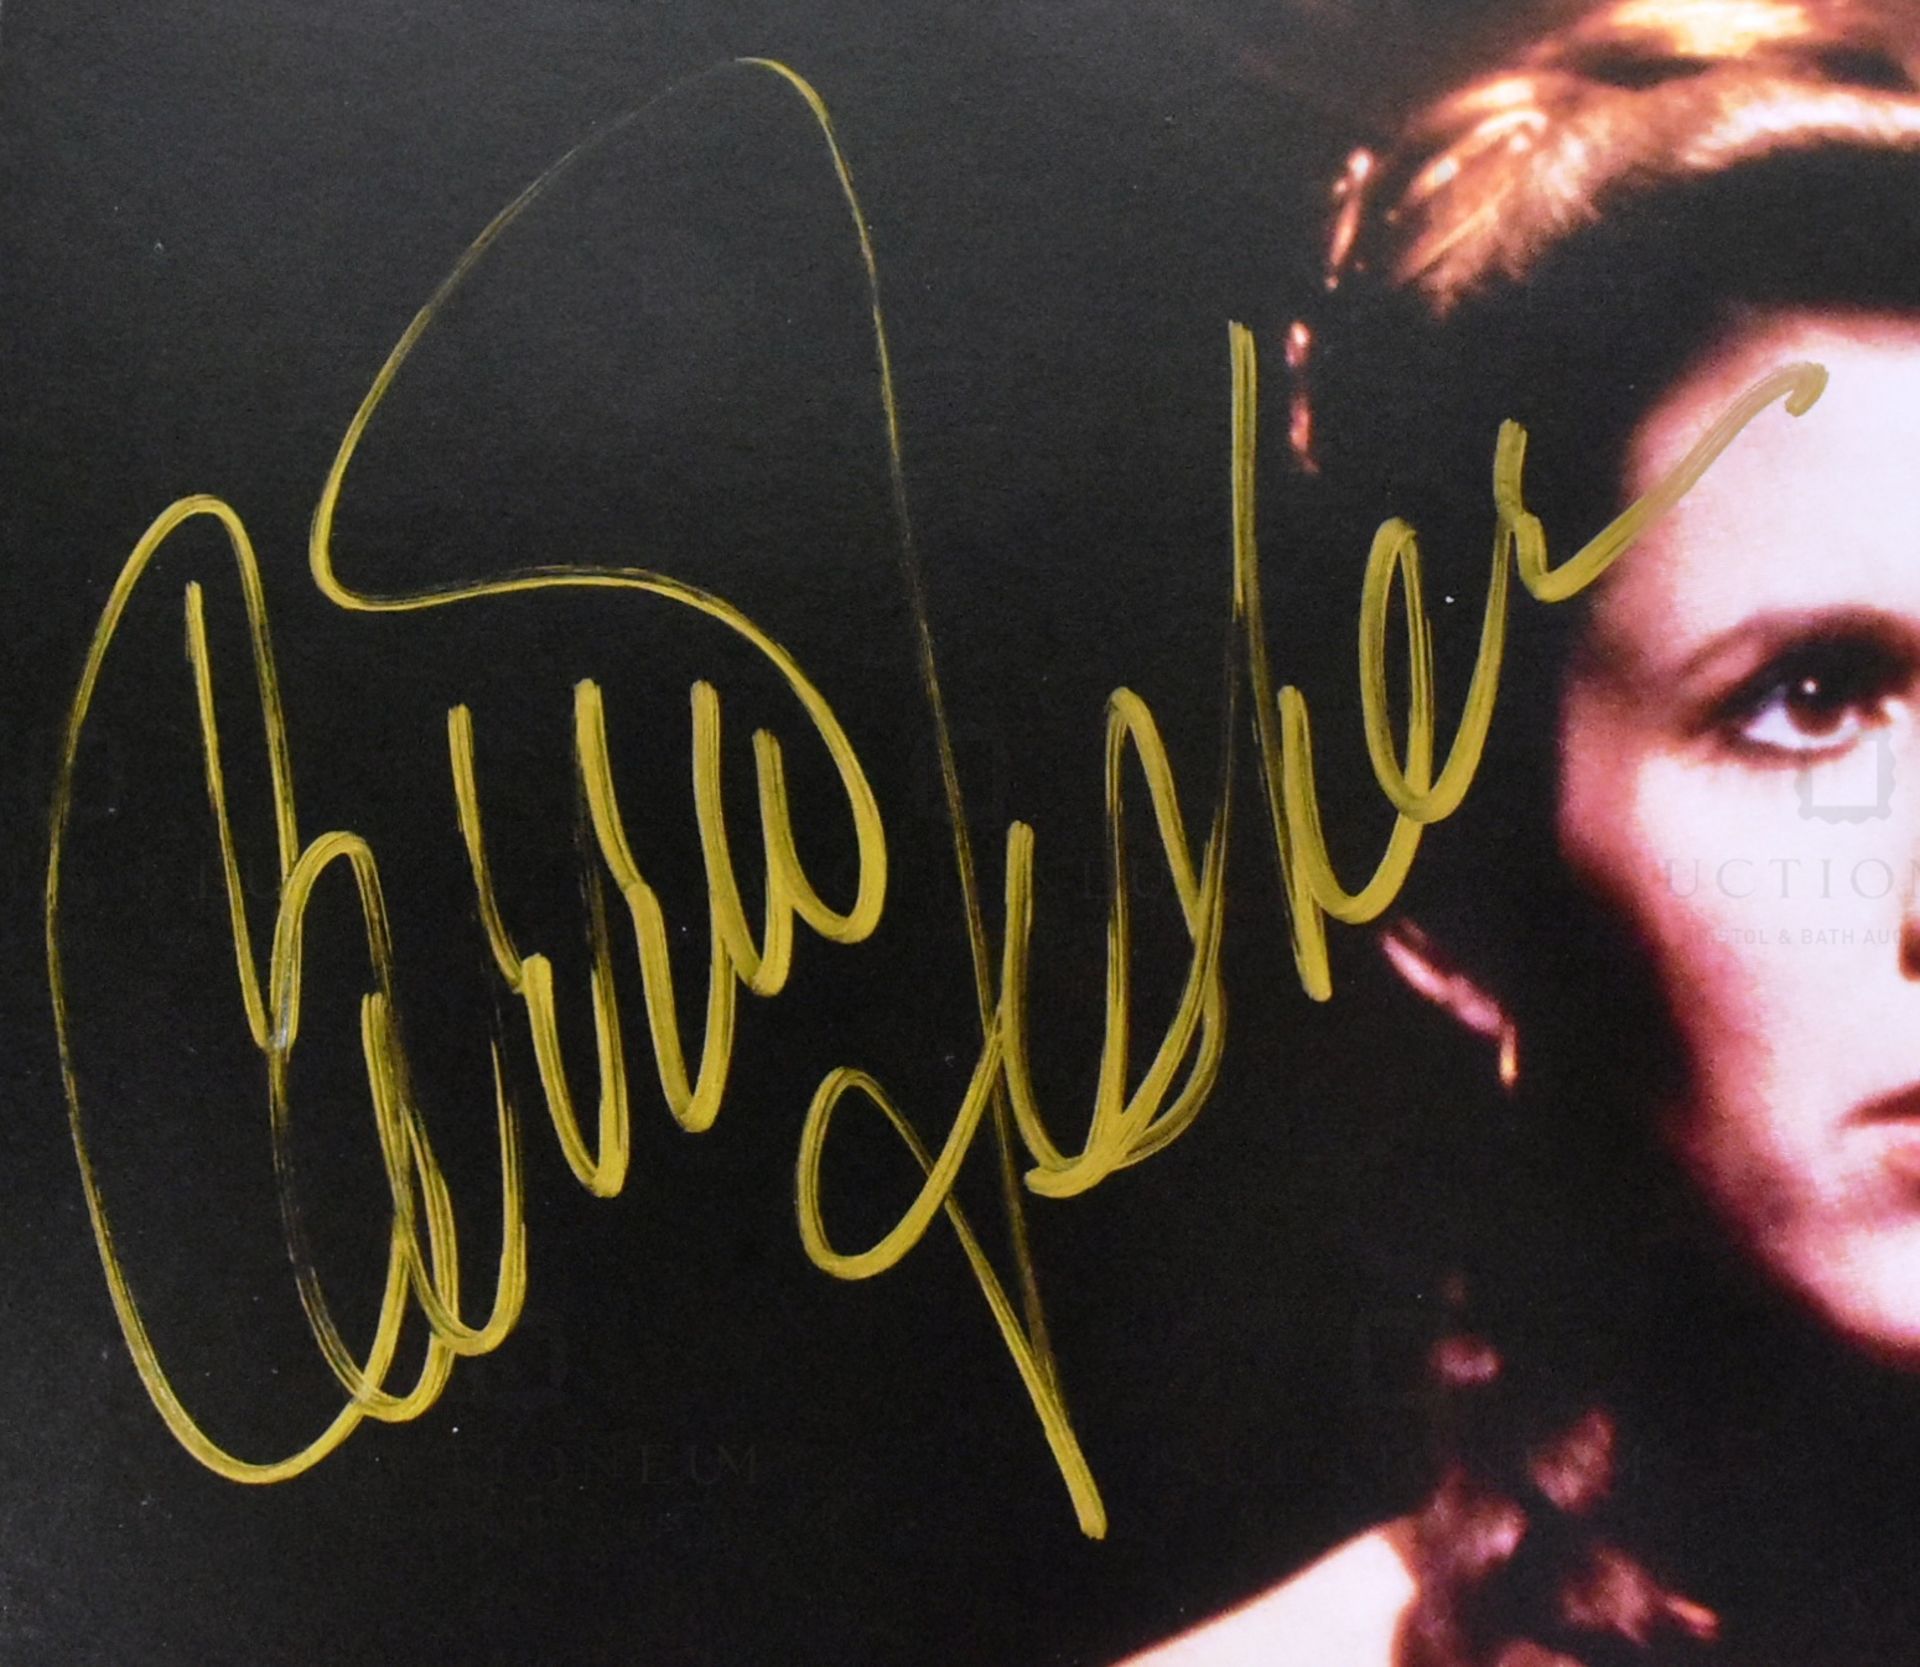 CARRIE FISHER (1956-2016) - STAR WARS - AUTOGRAPHED 8X10" PHOTO - ACOA - Image 2 of 2